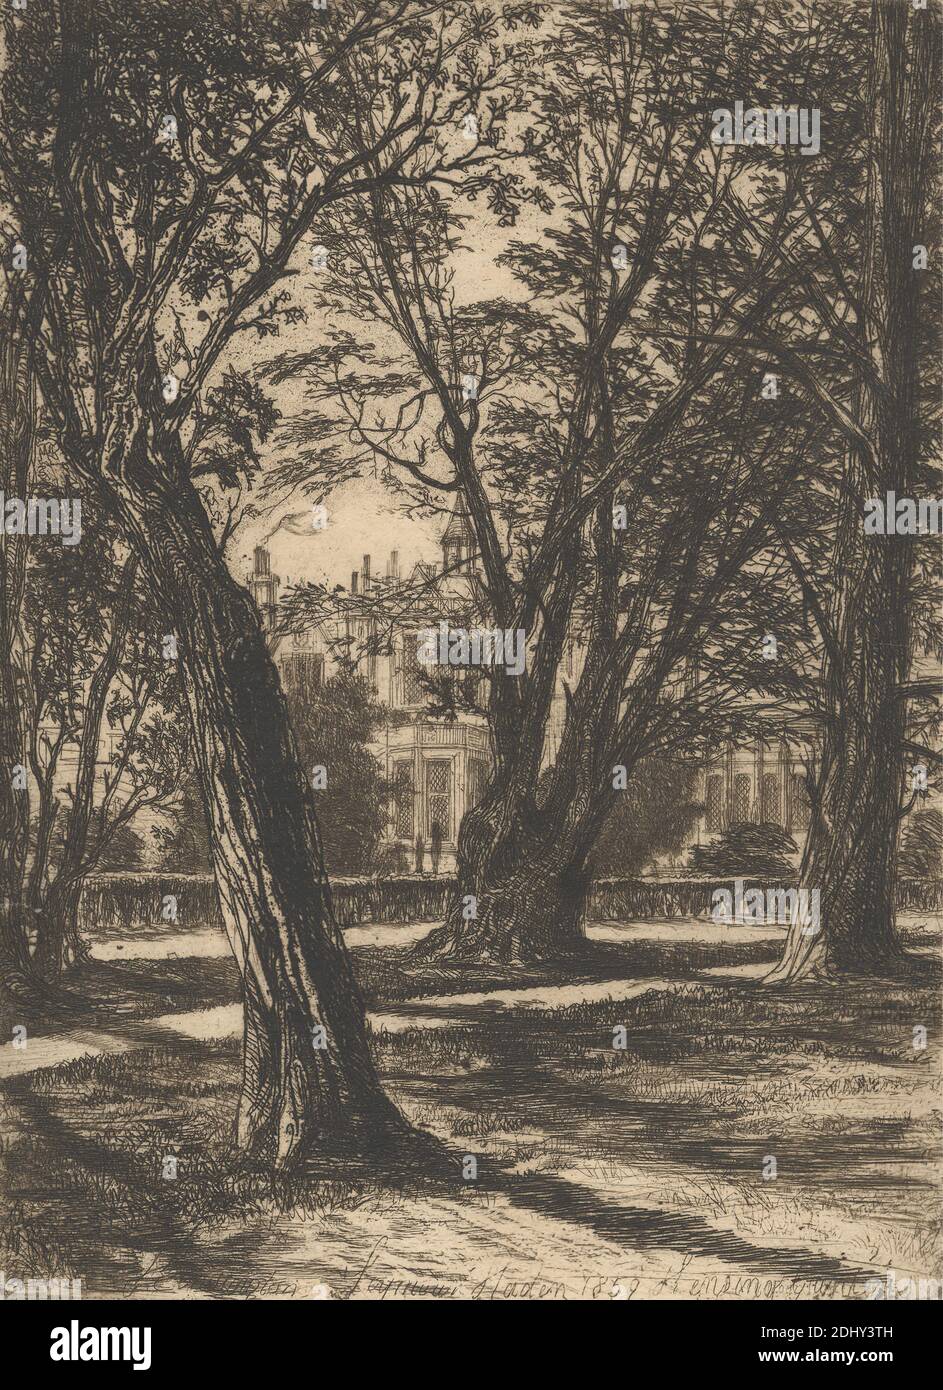 Kensington Gardens, no. 1 (small plate), Francis Seymour Haden, 1818–1910, British, 1859, Etching and drypoint, with plate tone on medium, slightly textured, cream antique laid paper, Sheet: 7 5/8 x 5 9/16 inches (19.3 x 14.2 cm), Plate: 6 1/4 x 4 5/8 inches (15.9 x 11.7 cm), and Image: 6 1/4 x 4 5/8 inches (15.9 x 11.7 cm), architectural subject, building, chimneys, cityscape, garden, grass, hedge, house, landscape, lawn, palace, path, shadows, trees, turret, windows, England, Europe, Hyde Park, Kensington, Kensington Gardens, London, United Kingdom Stock Photo